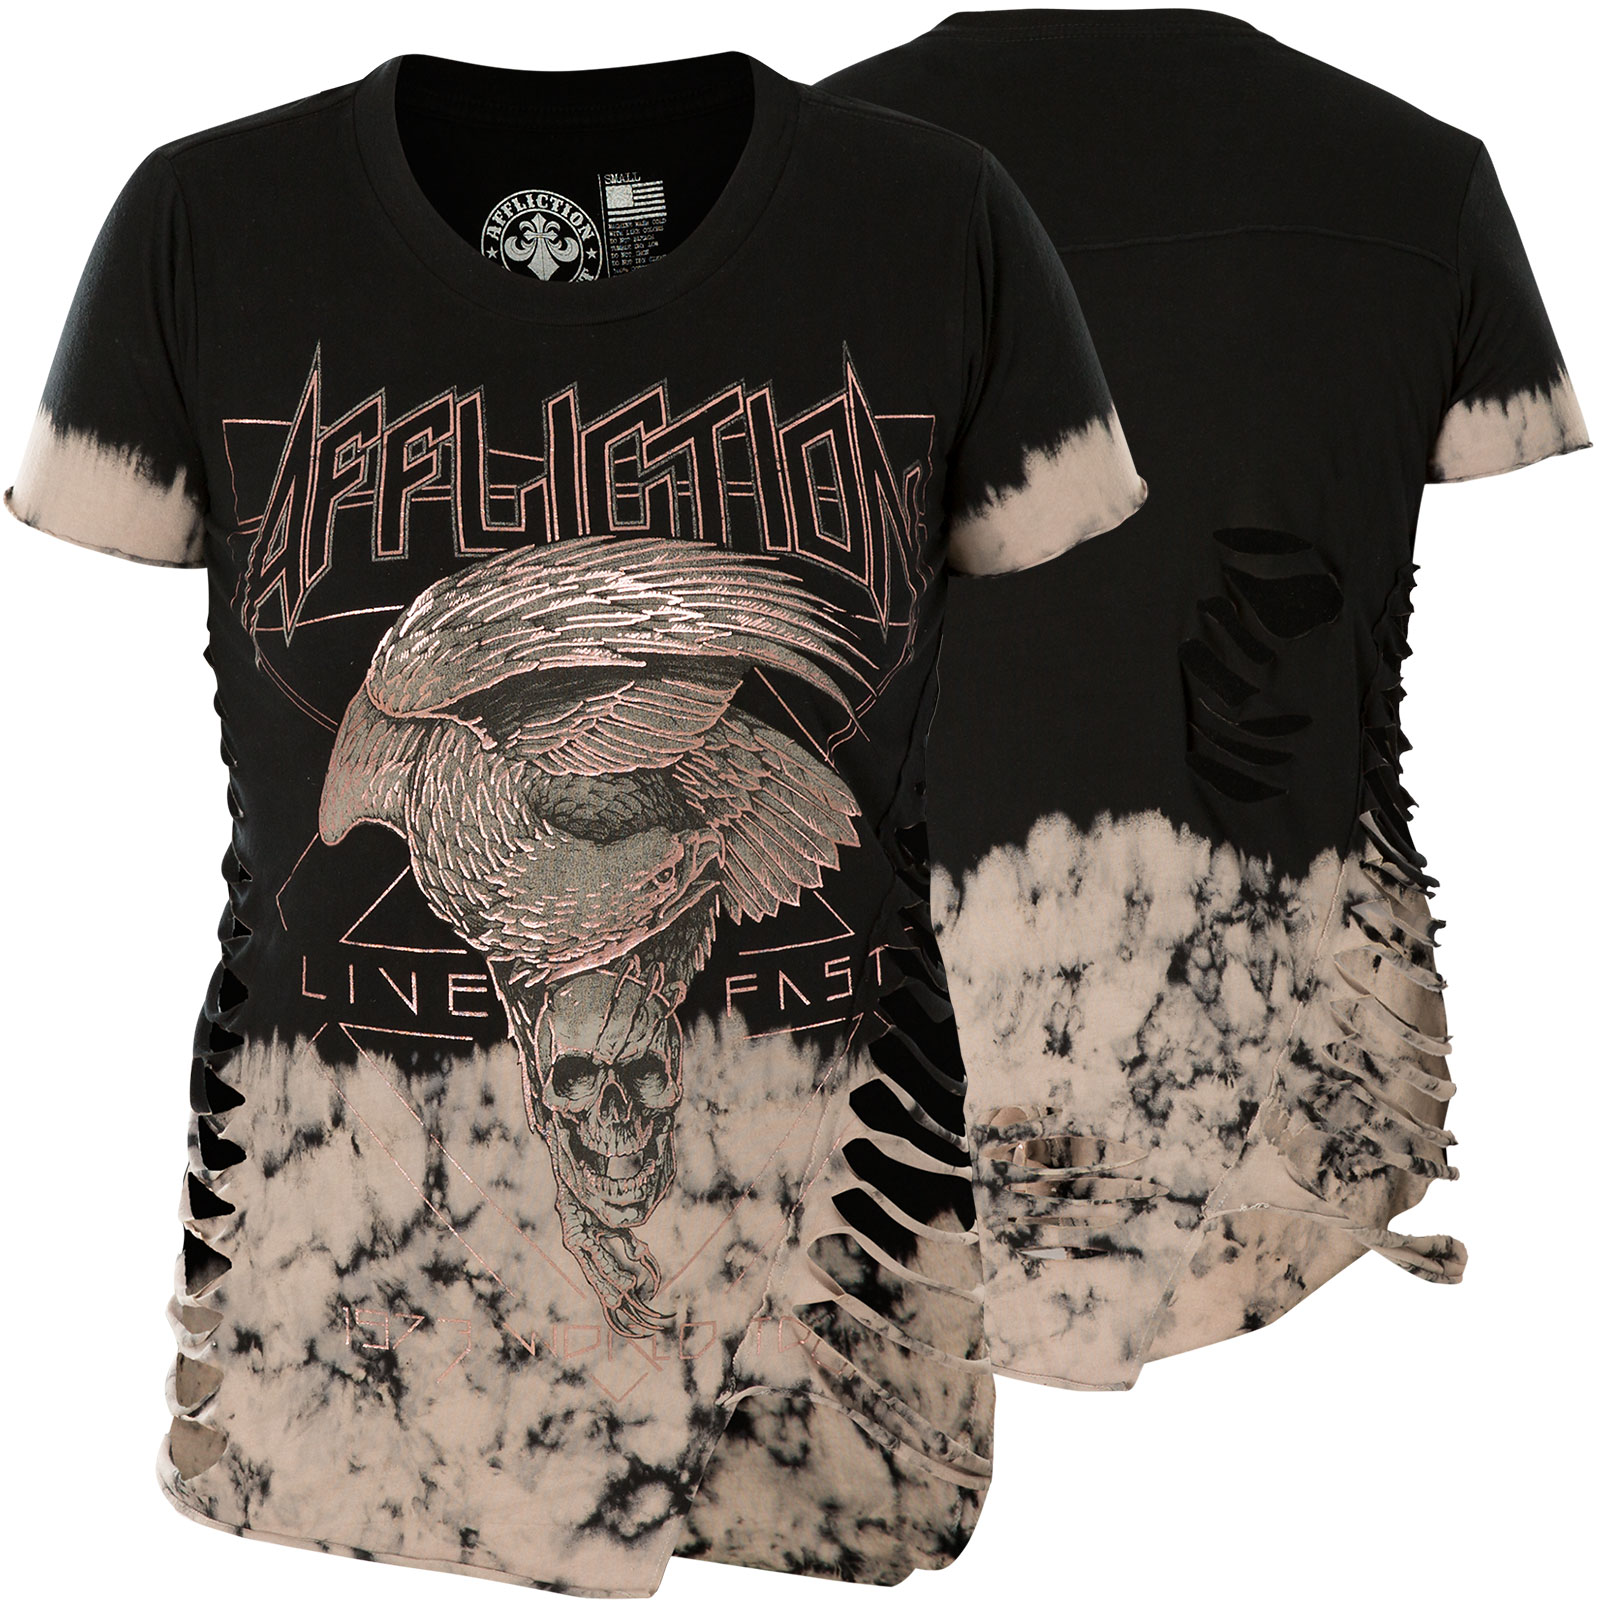 Affliction T-Shirt Eagle Rock print with bird and skull